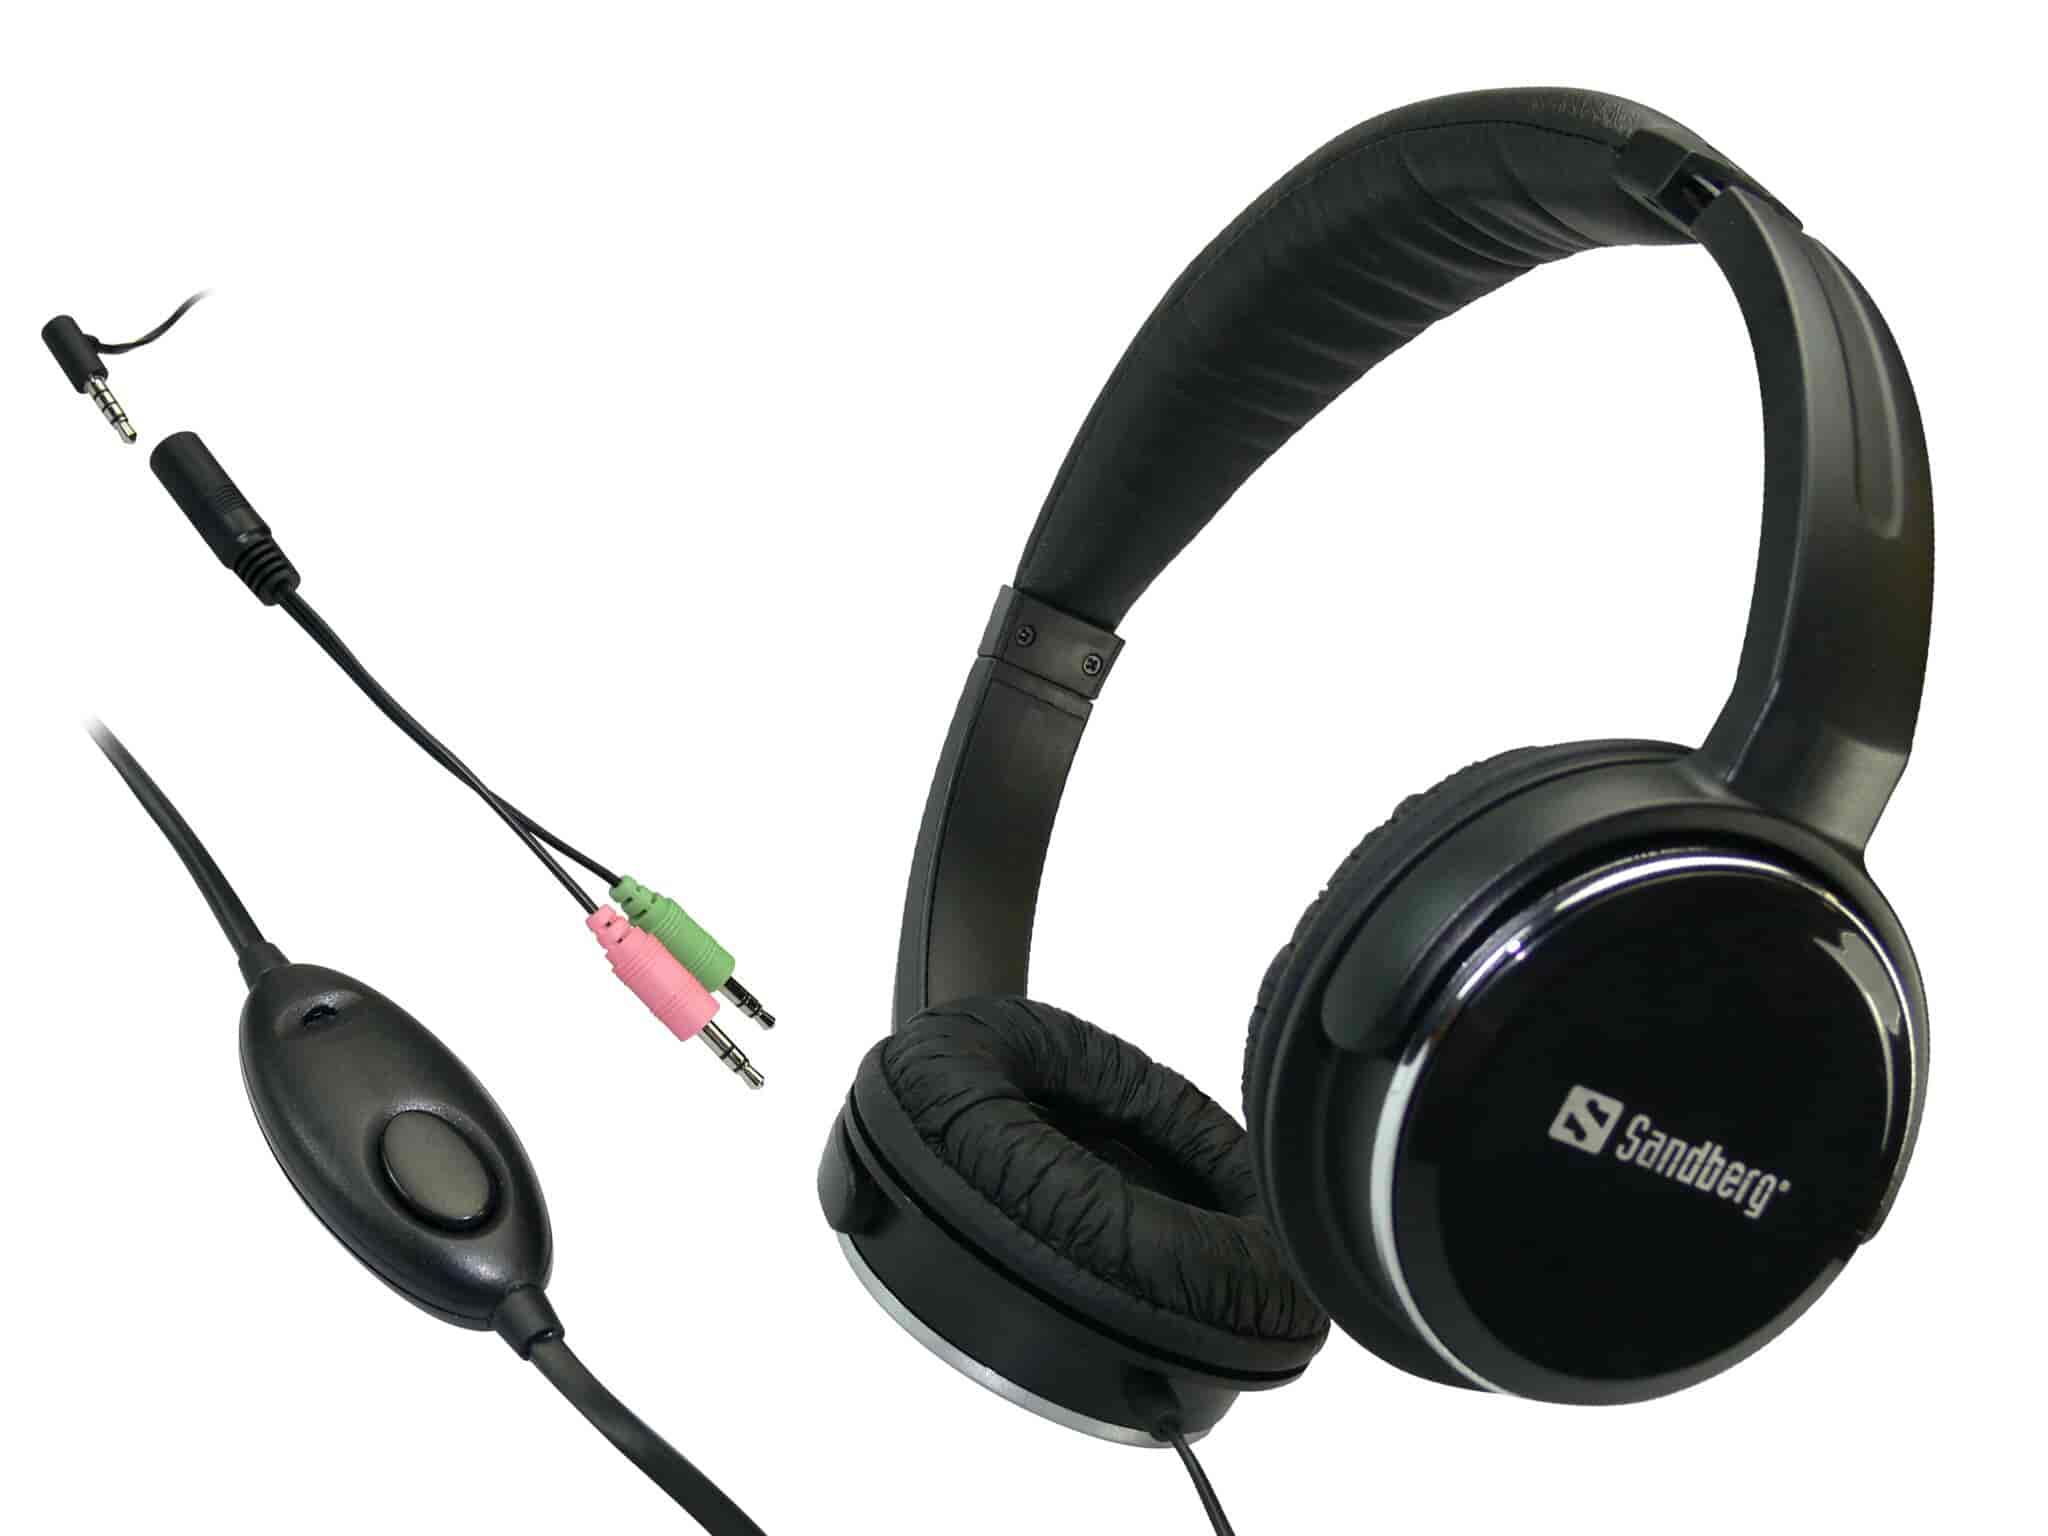 Sandberg Home'n Street Headset BlackWith Sandberg Home’n Street Headset you get great sound in a stylish headset. A padded headband and soft ear pads make the headset comfortable to wear even for extended periods of time. Can be connected directly to a smartphone. Adapter for PC included. The cable features a microphone and answer button for incoming calls, so you don't have to take the phone out of your pocket.Sandberg